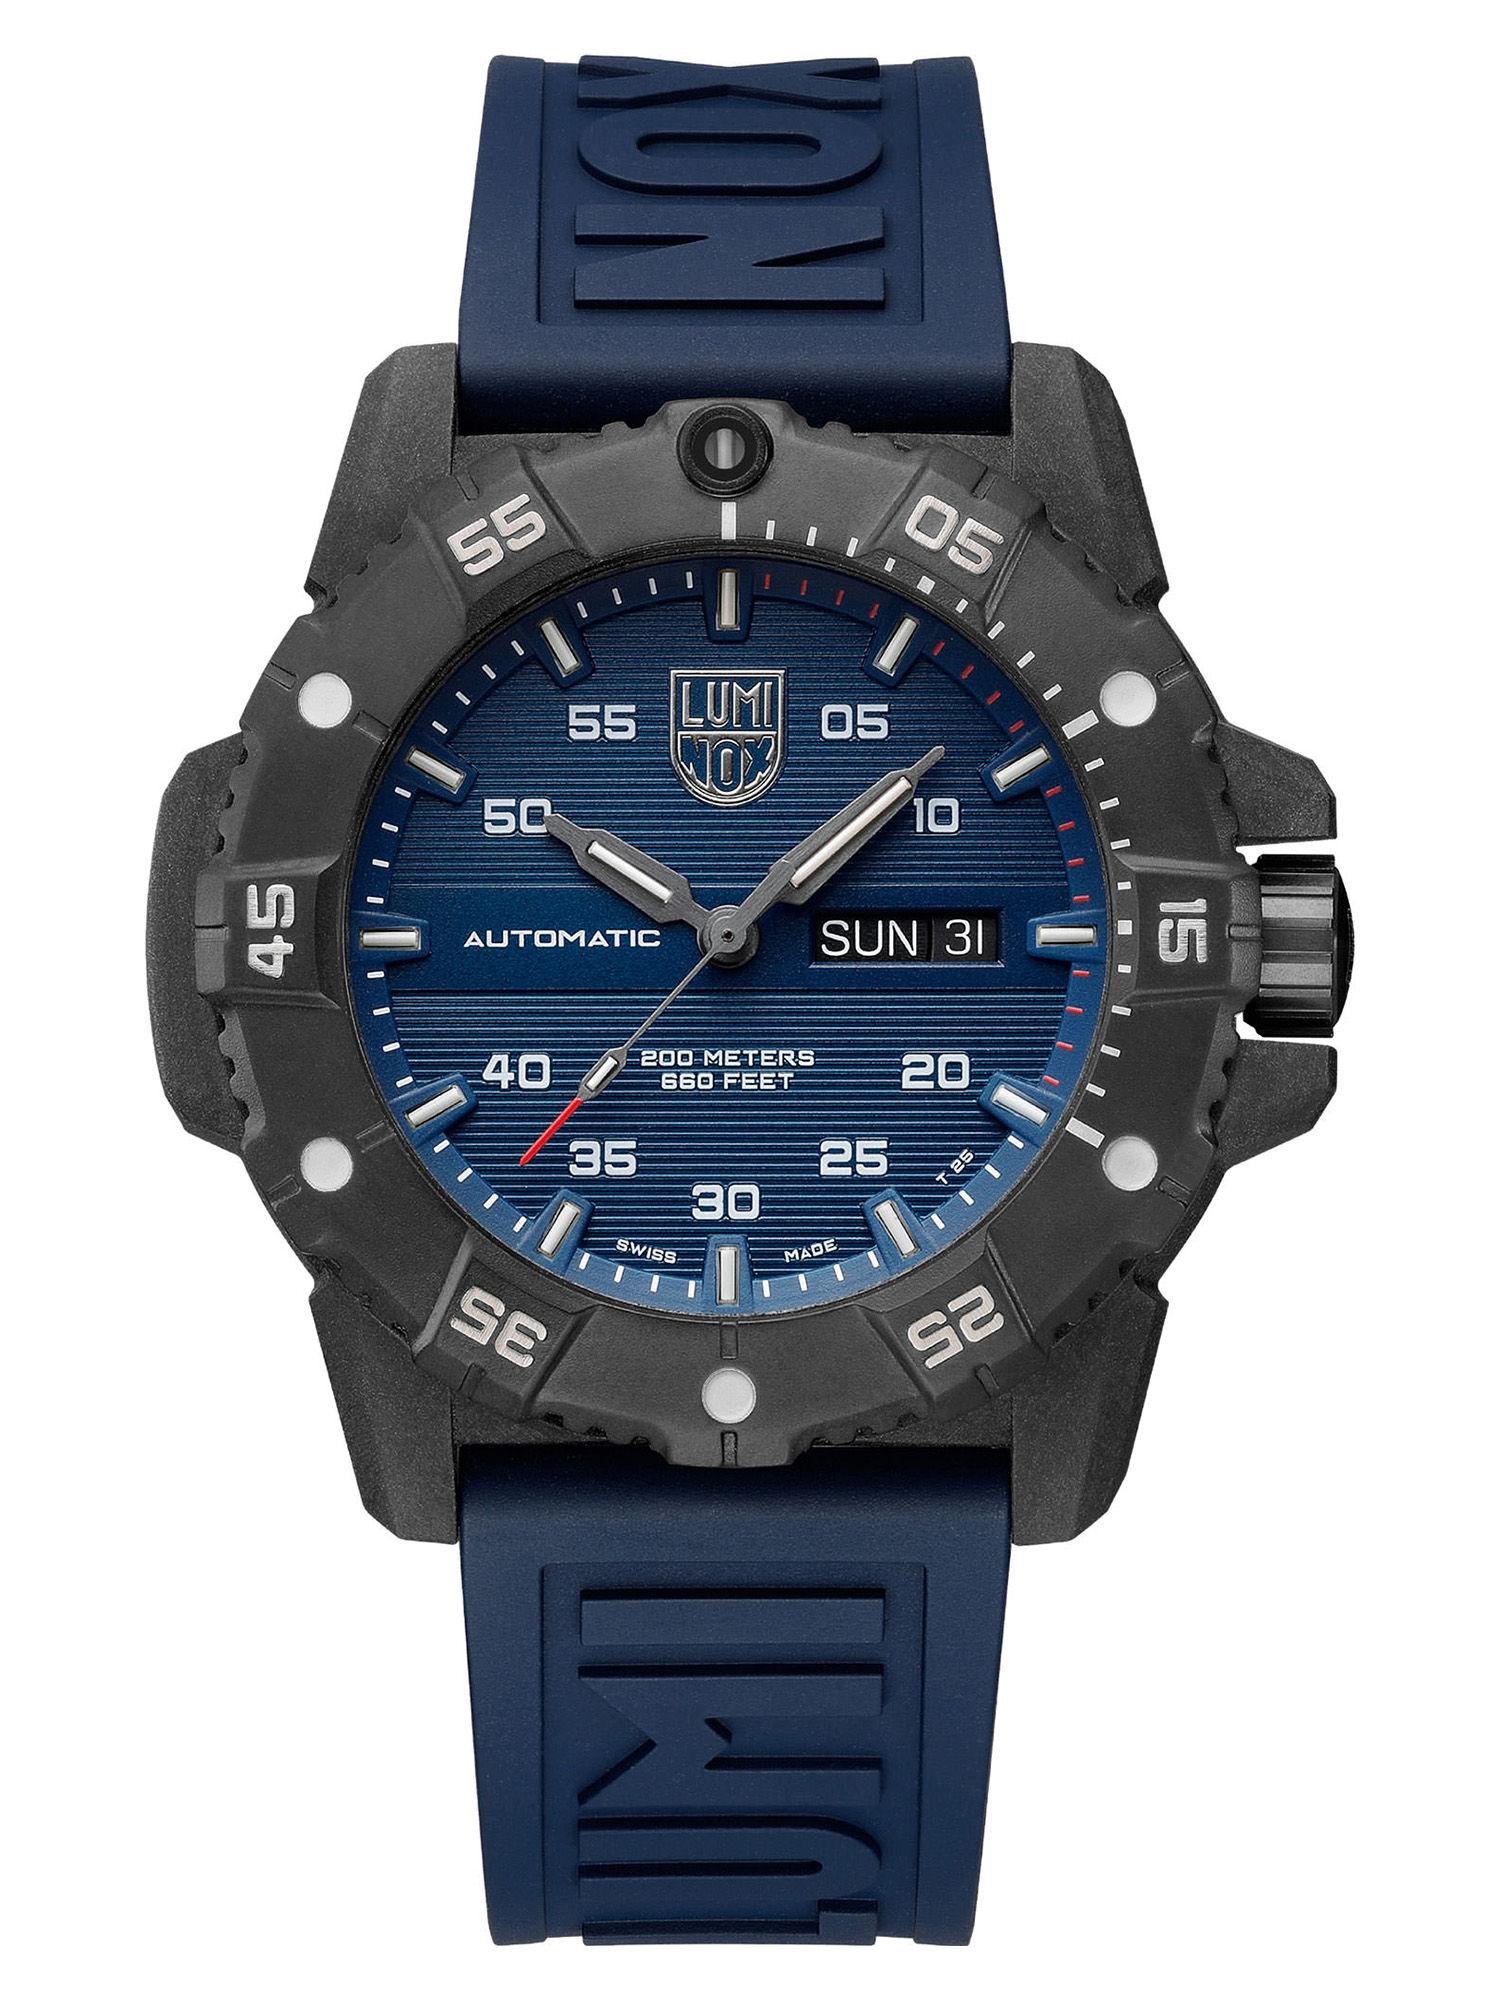 sea date analog dial color blue mens watch - xs.3863